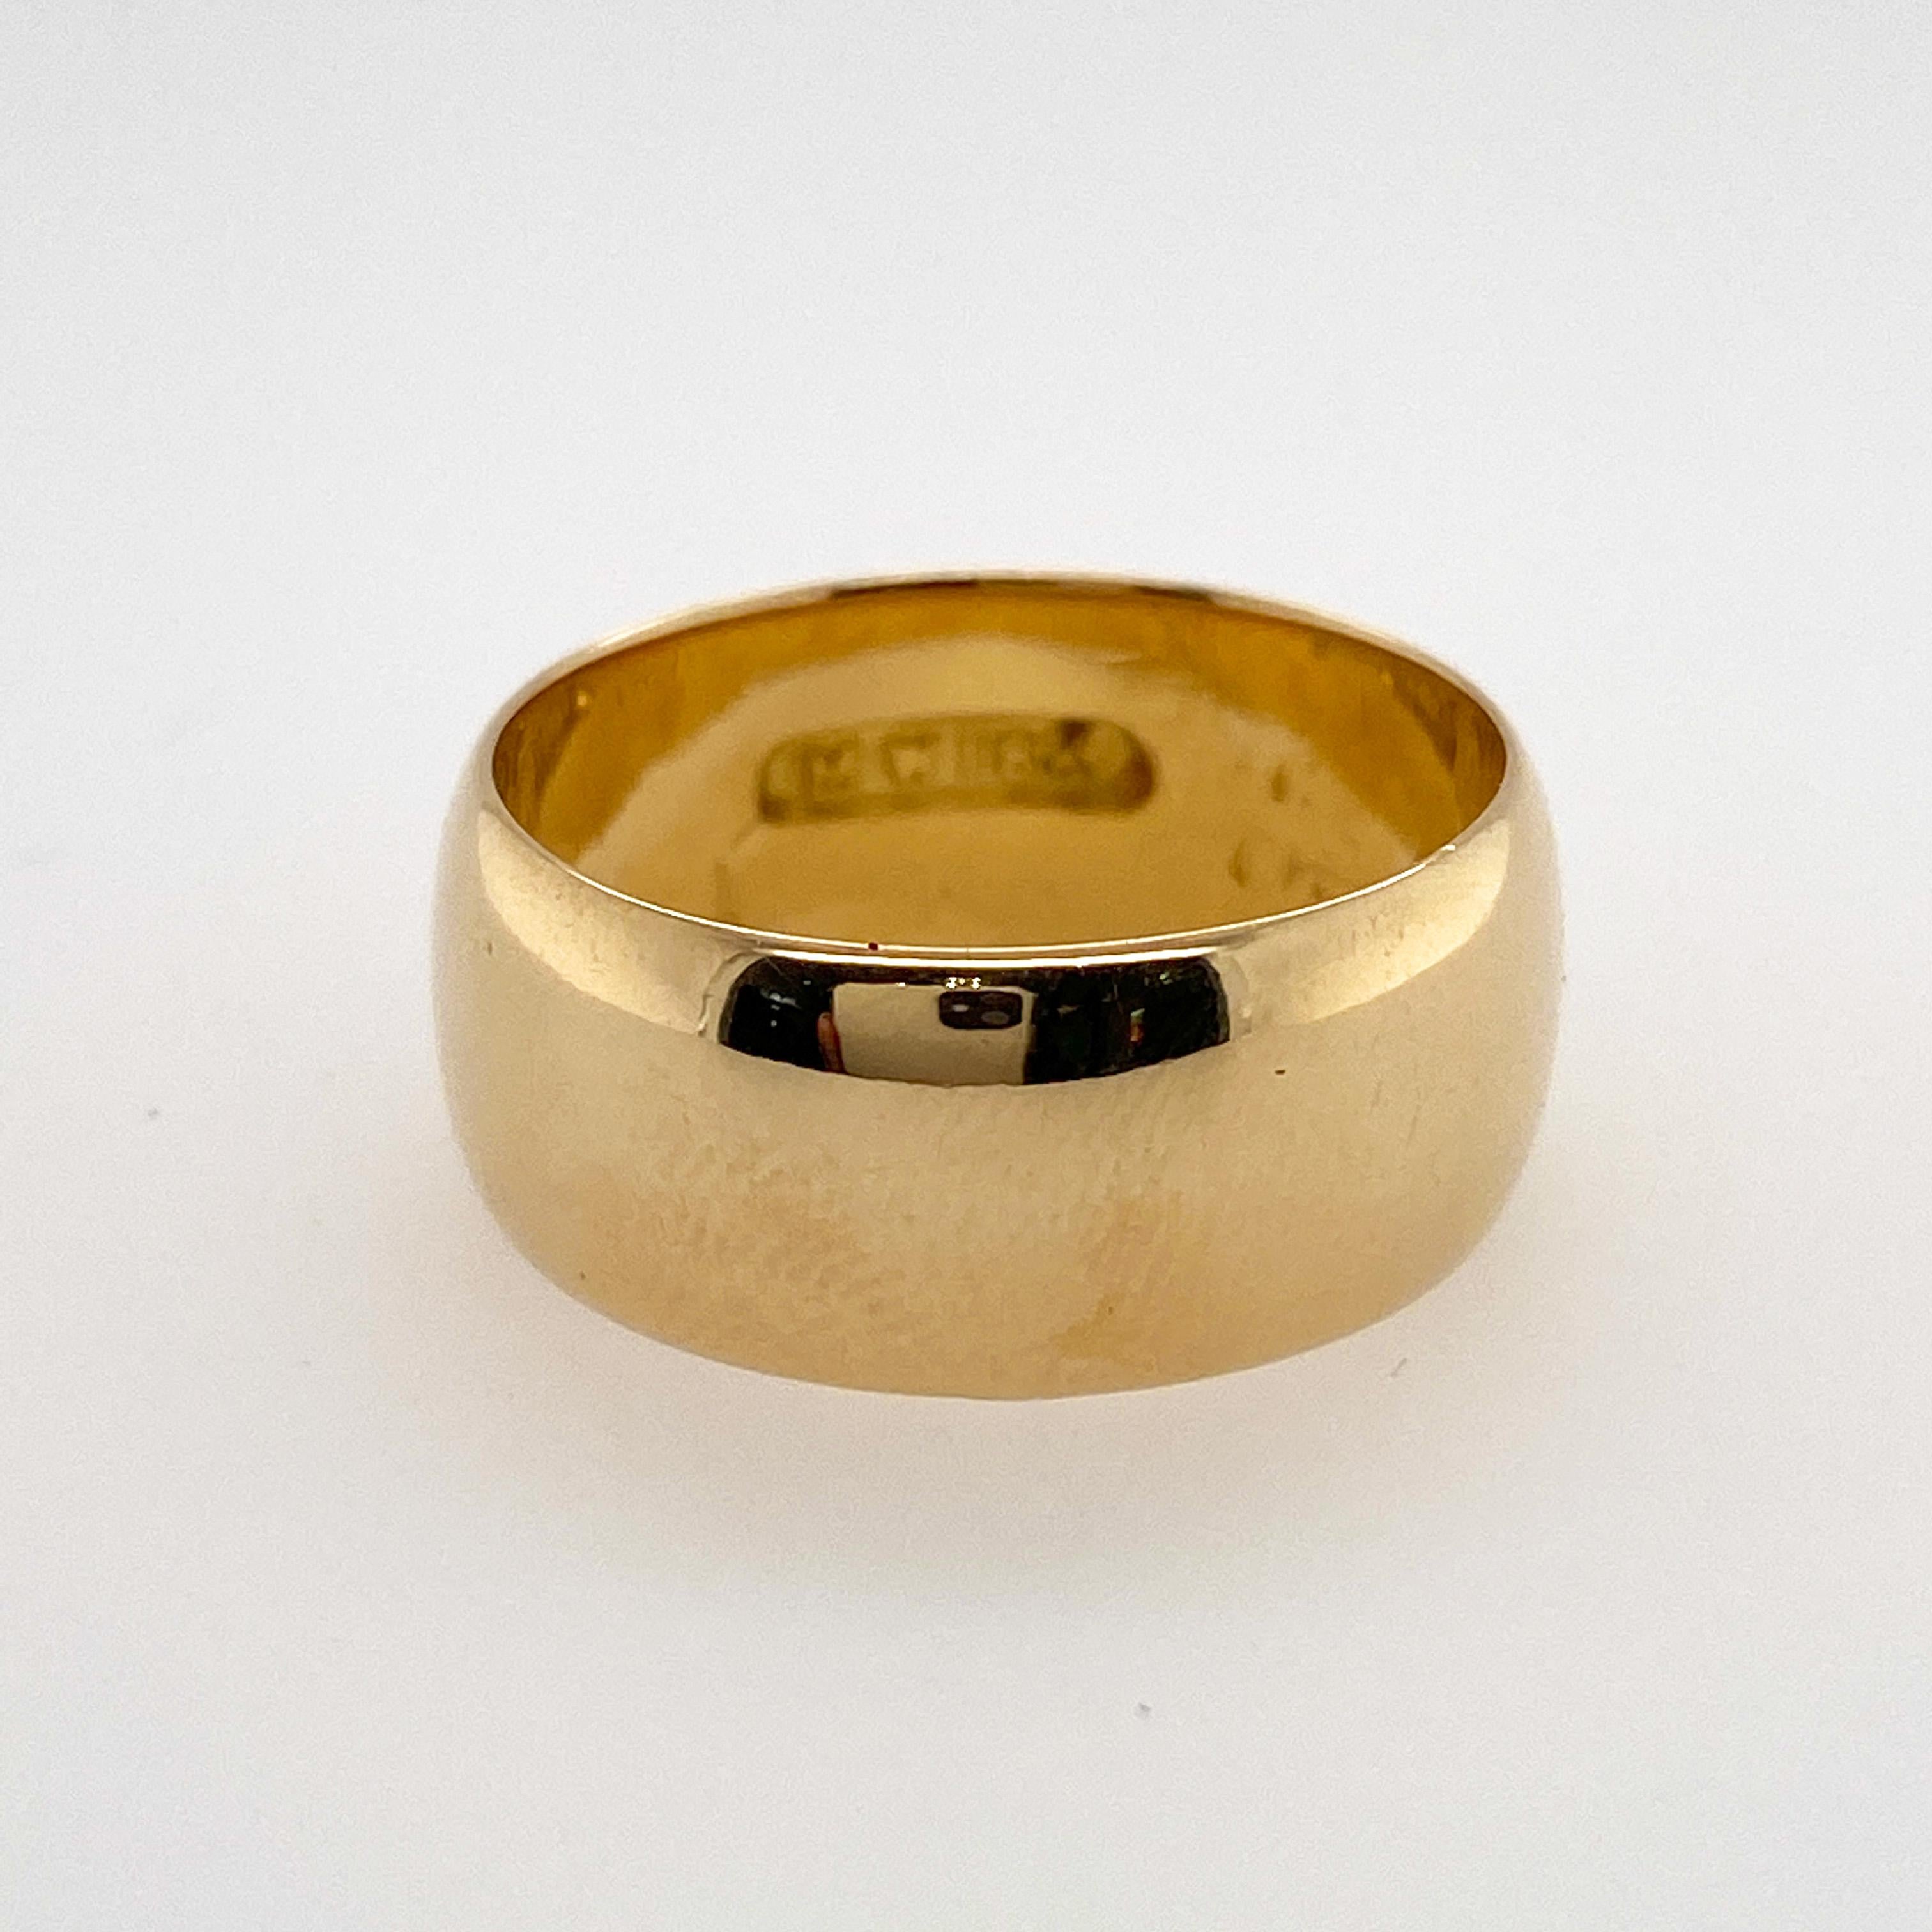 This classic domed wedding band is made in a bold 8.5 millimeter width, with the warm color that comes from brightly polished 18 karat yellow gold. The profile of the band is made in a low dome that makes it extremely comfortable to wear. The